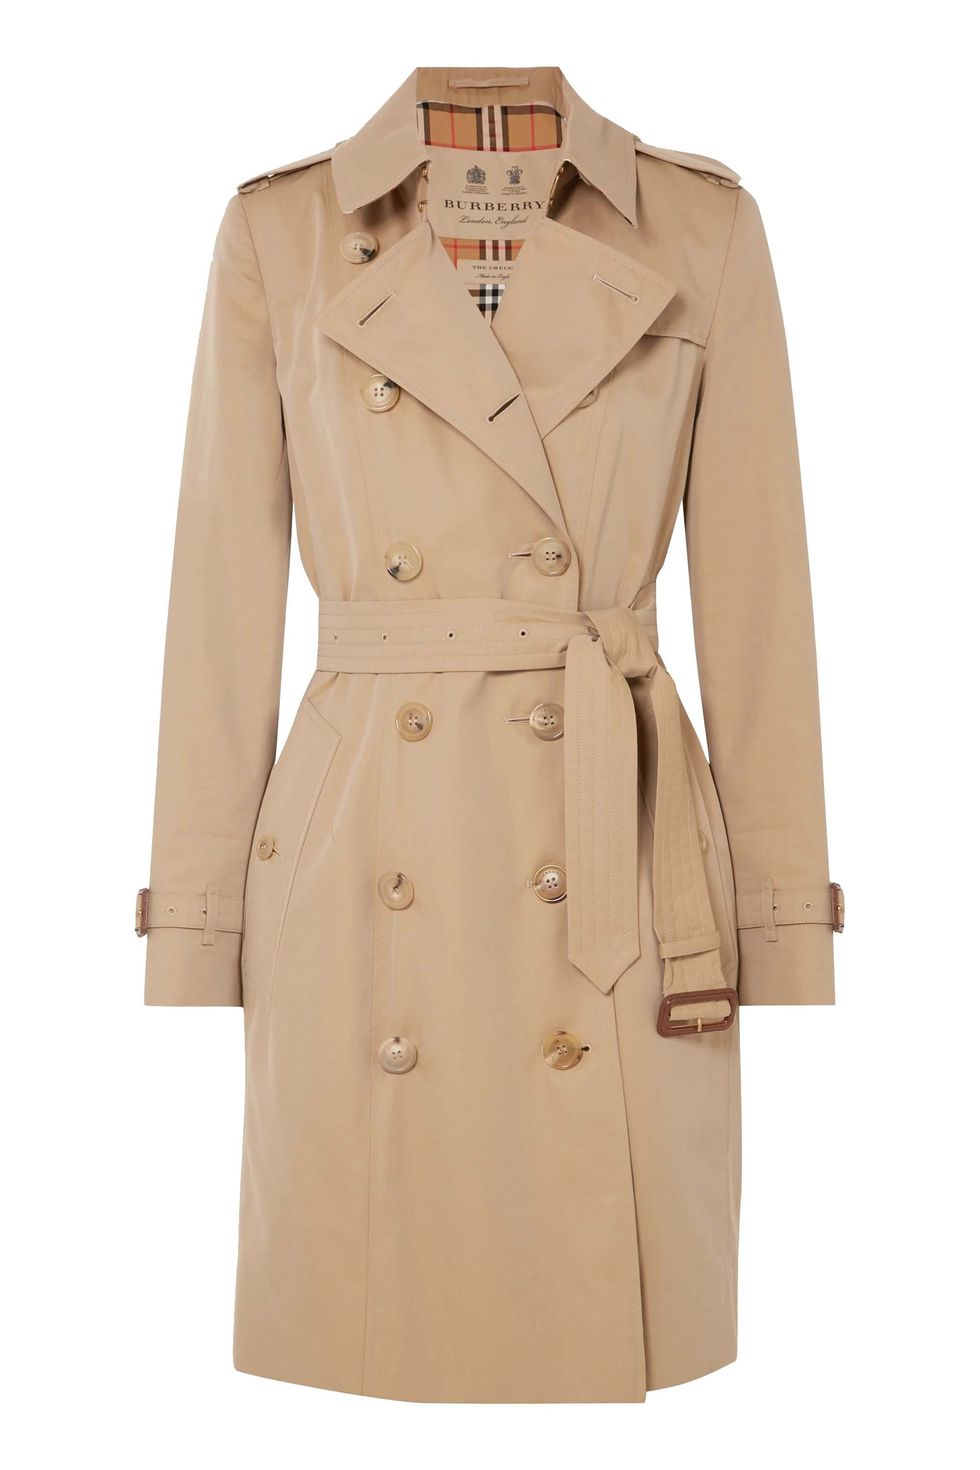 The Burberry trench